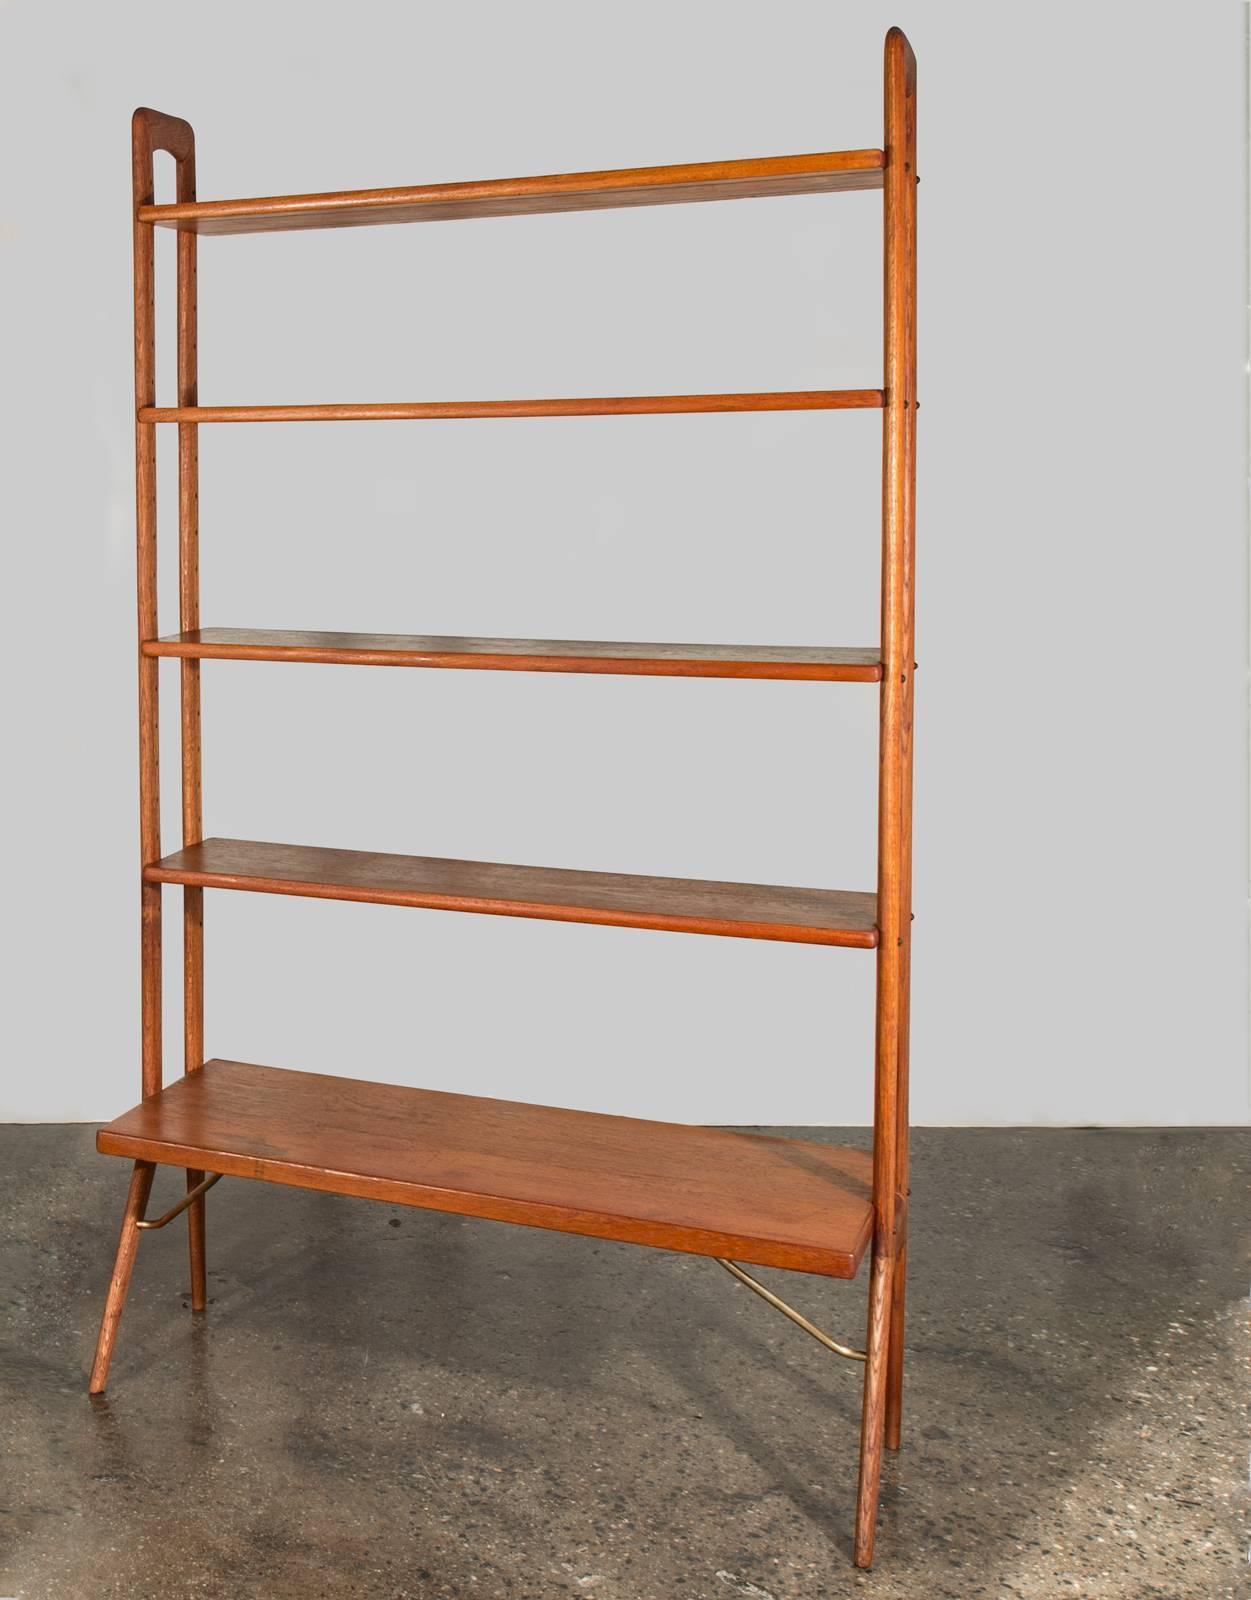 Graceful teak bookcase designed by Kurt Østervig. The shelves are adjustable, and the holes for repositioning form an integral part of the aesthetic appeal.

The wide shelf is deep enough to hold vinyl records and is supported by handsome brass